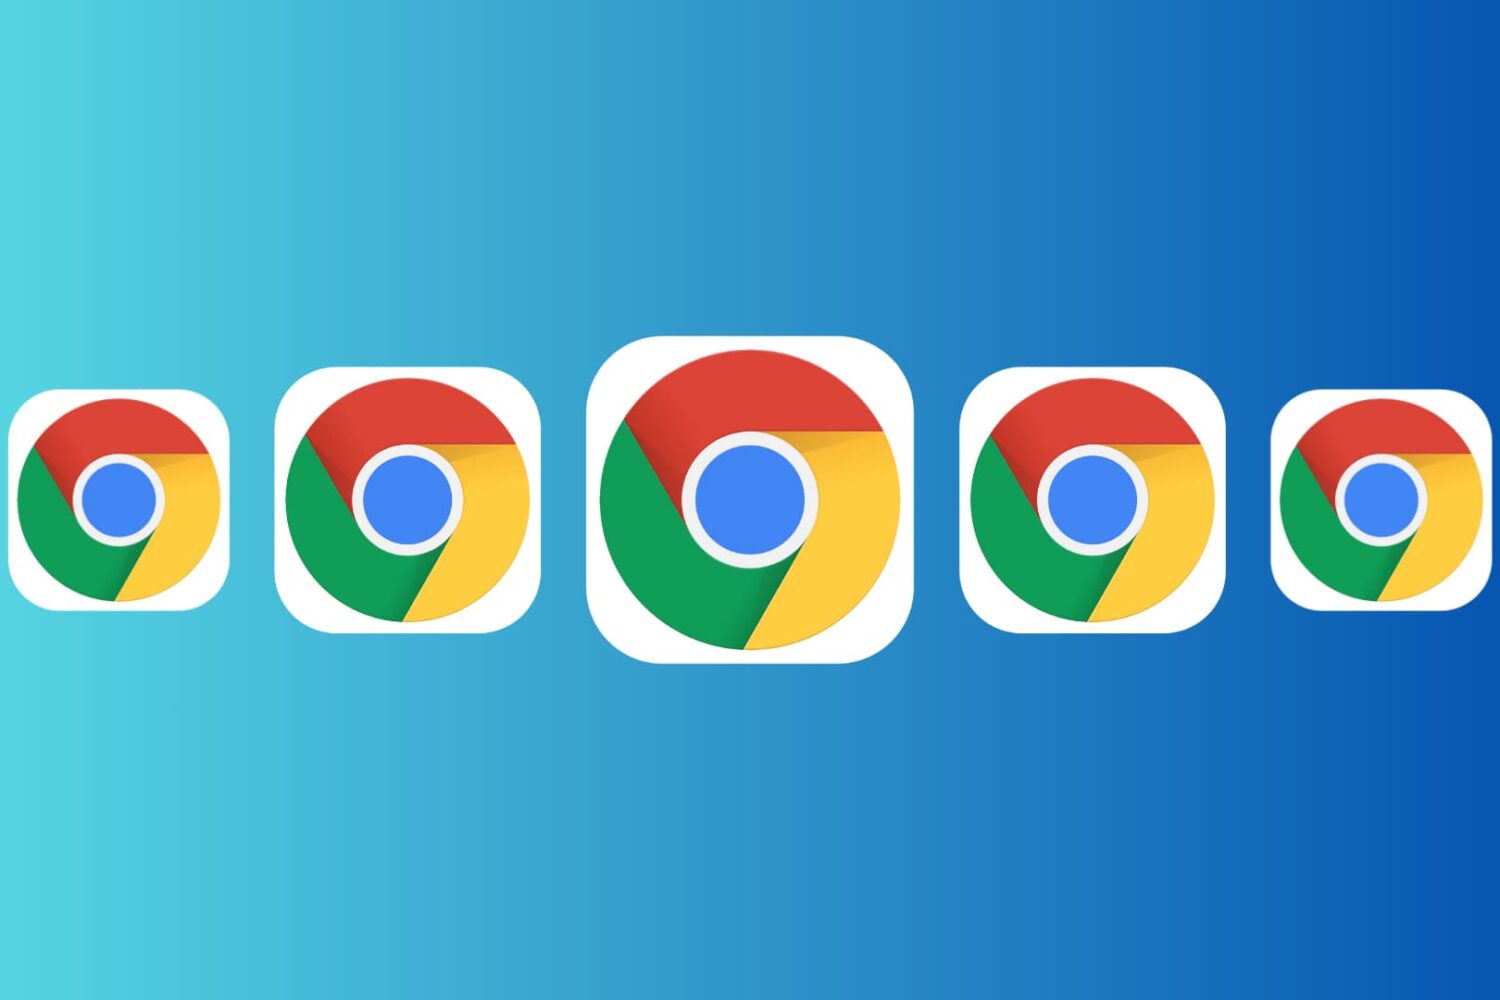 Multiple Google Chrome app icons in a horizontal stack